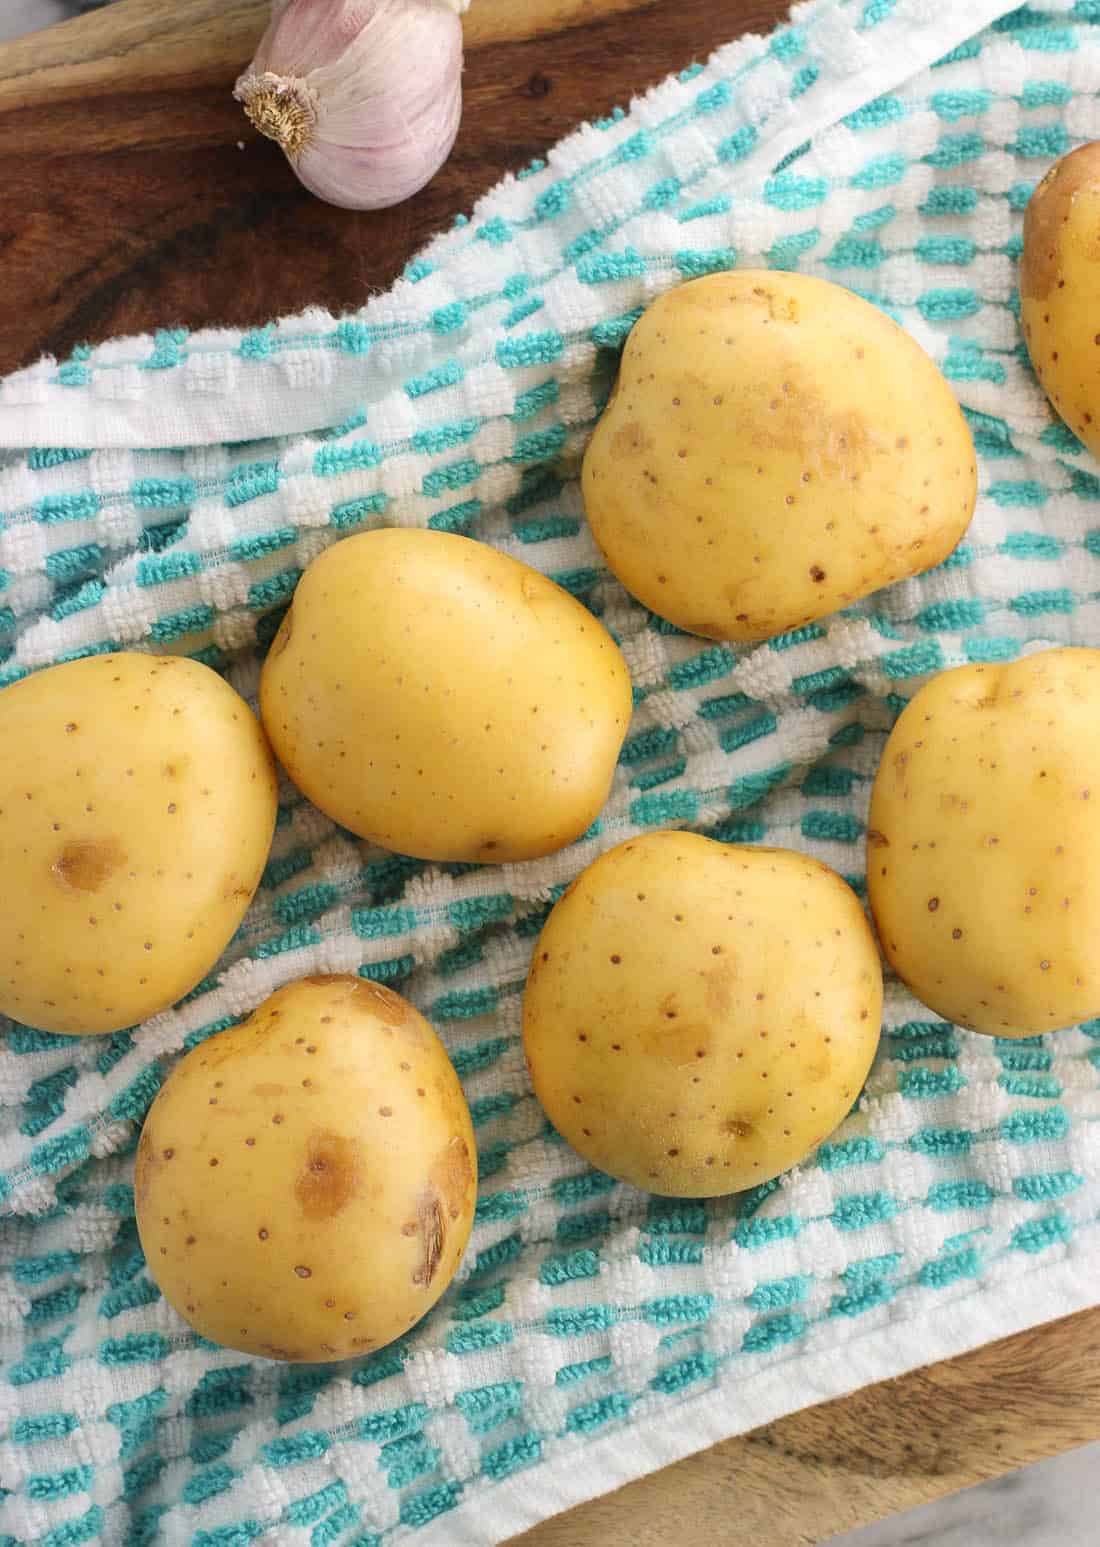 Seven scrubbed yellow potatoes on a dish towel next to a head of garlic